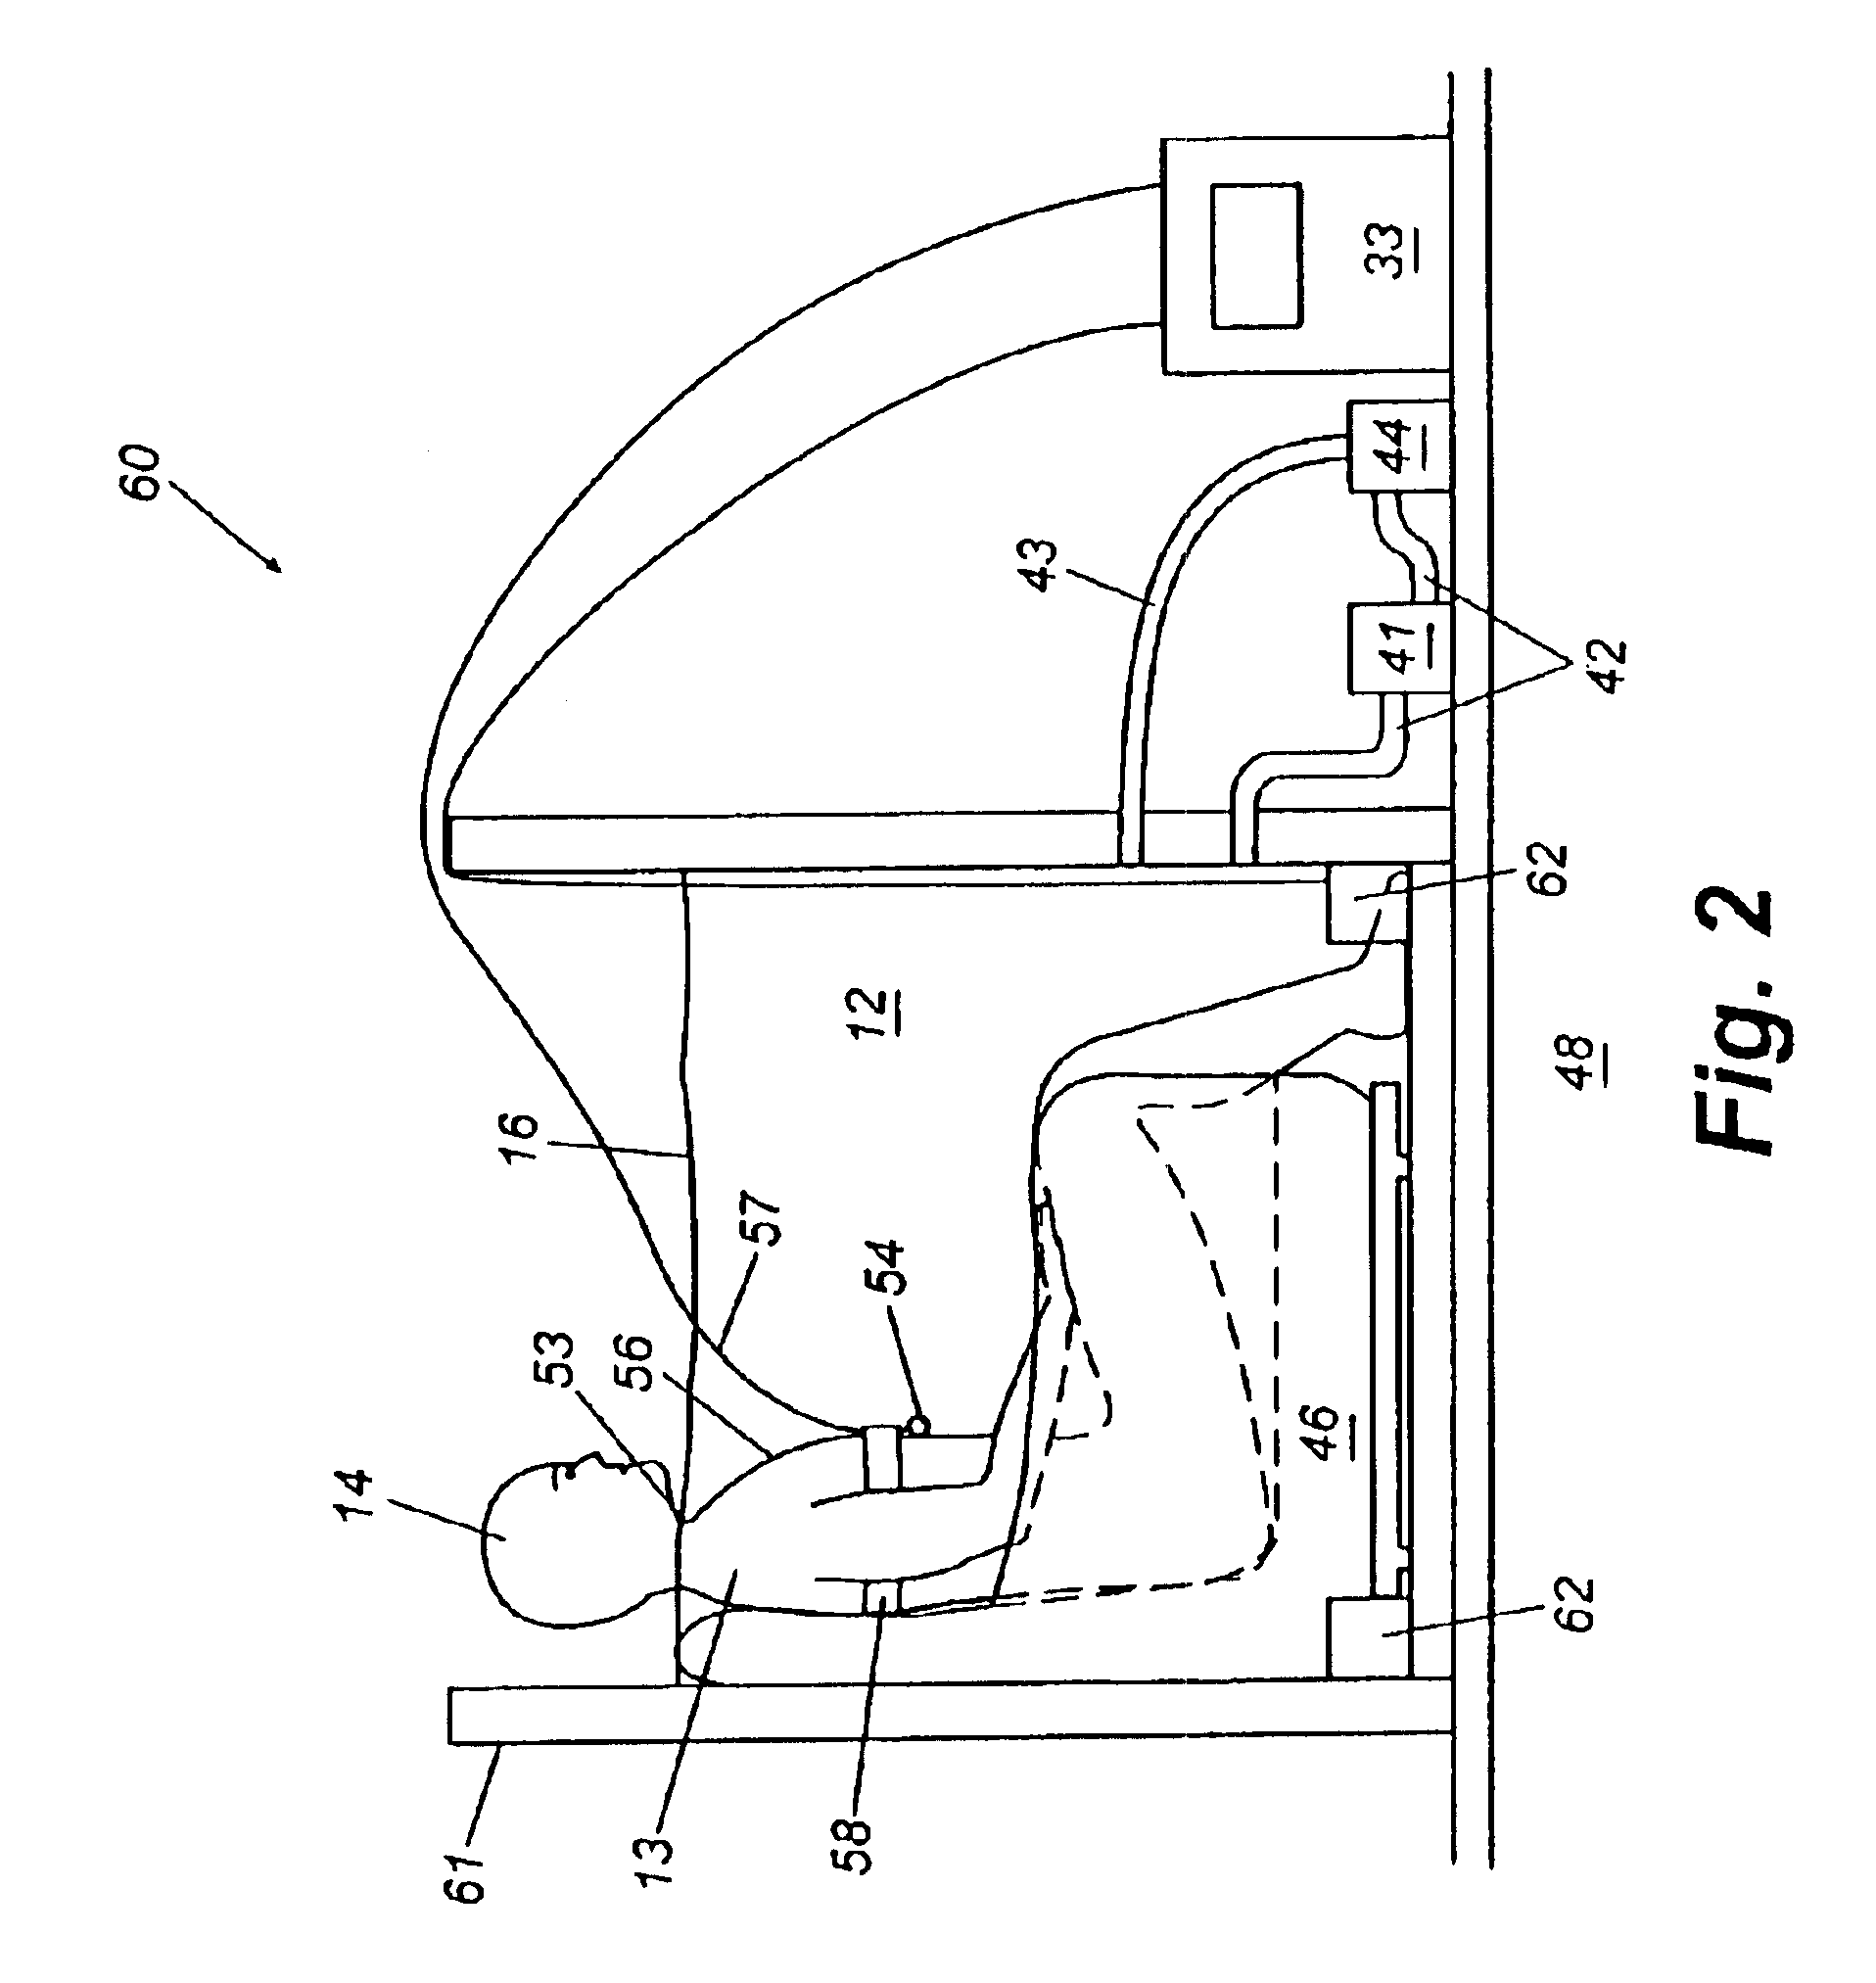 Apparatus and method for implementing hydro-acoustic therapy for the lungs